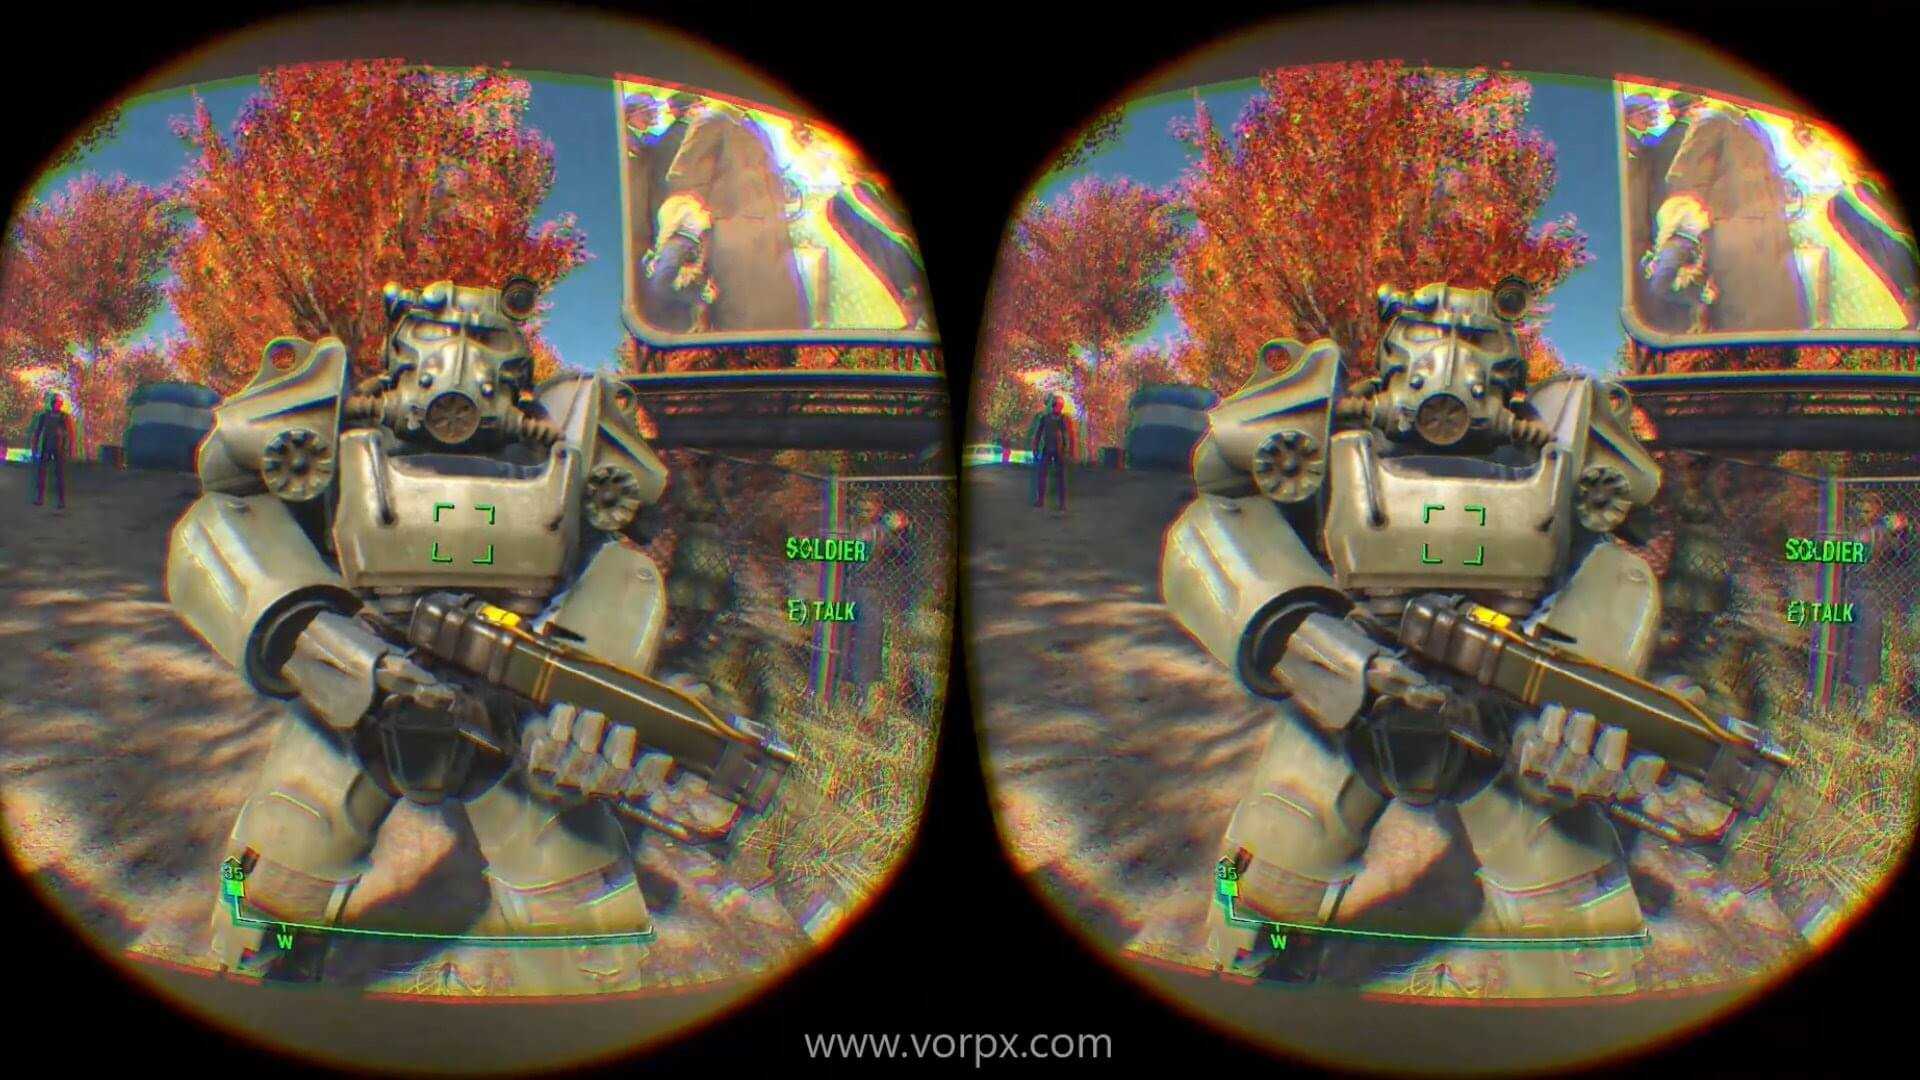 FALLOUT 4 – In Oculus Rift, Virtual Reality (VorpX profile 